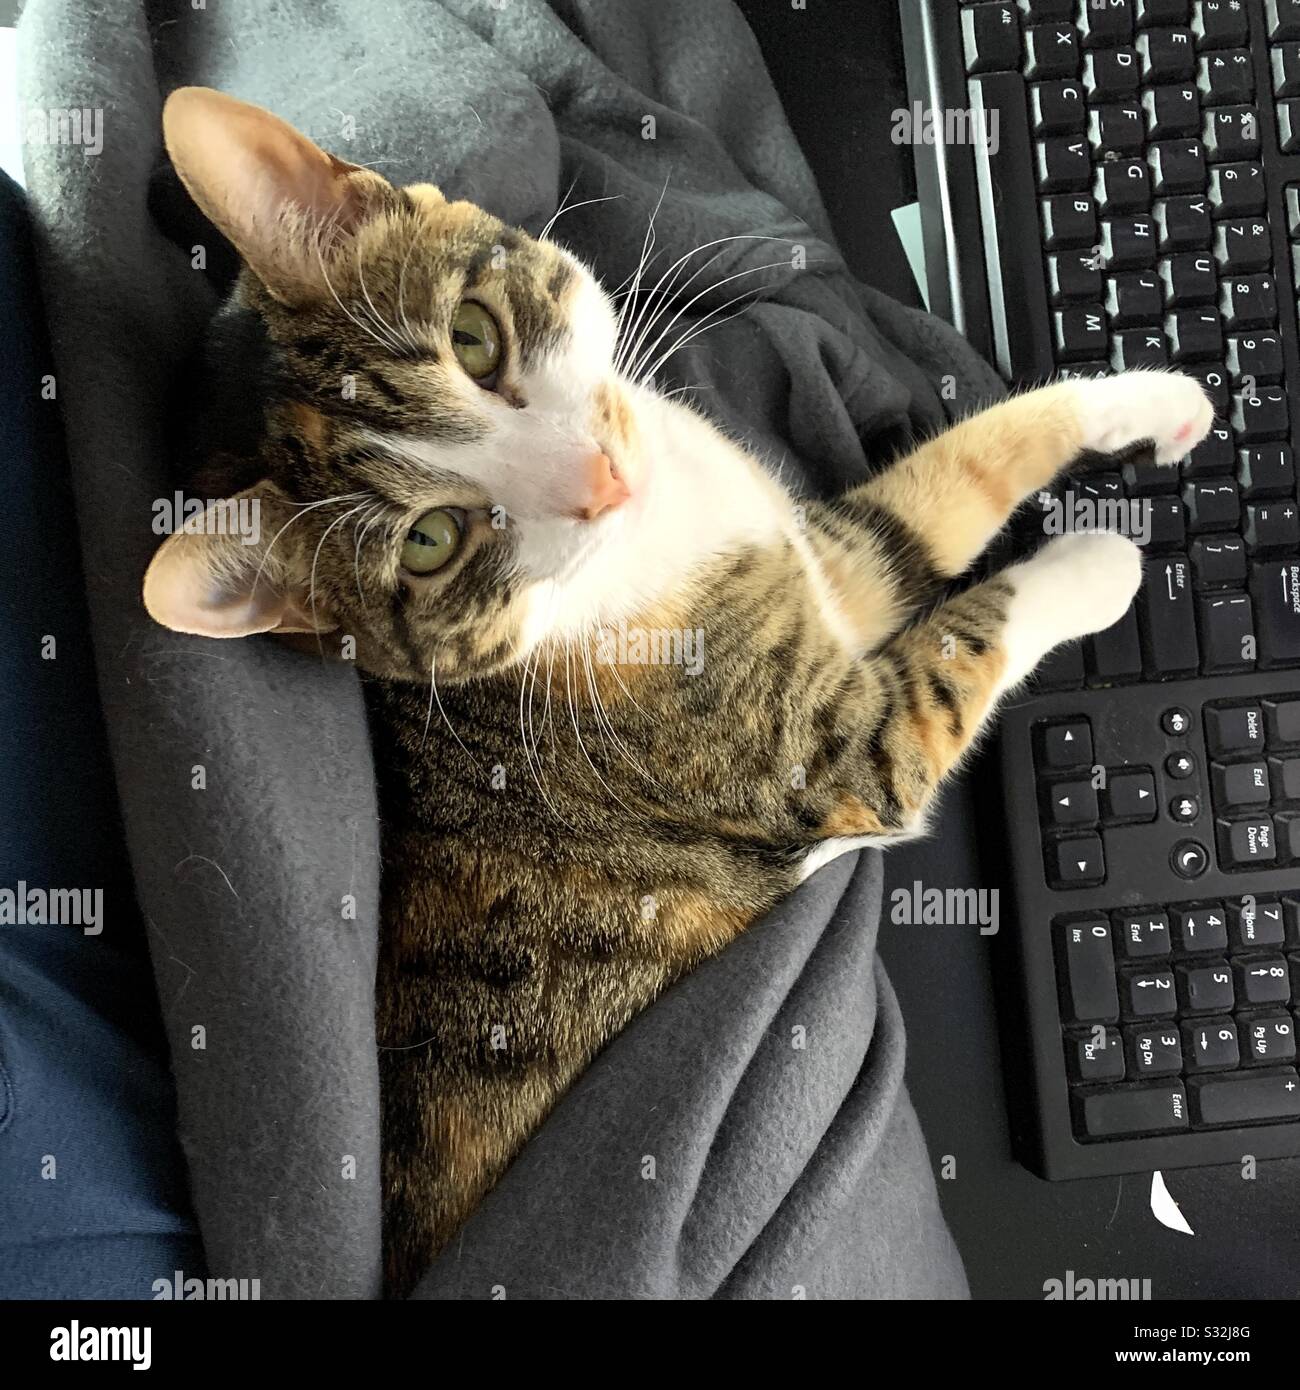 Cat looking up at camera, while sitting on a lap at a computer. Stock Photo